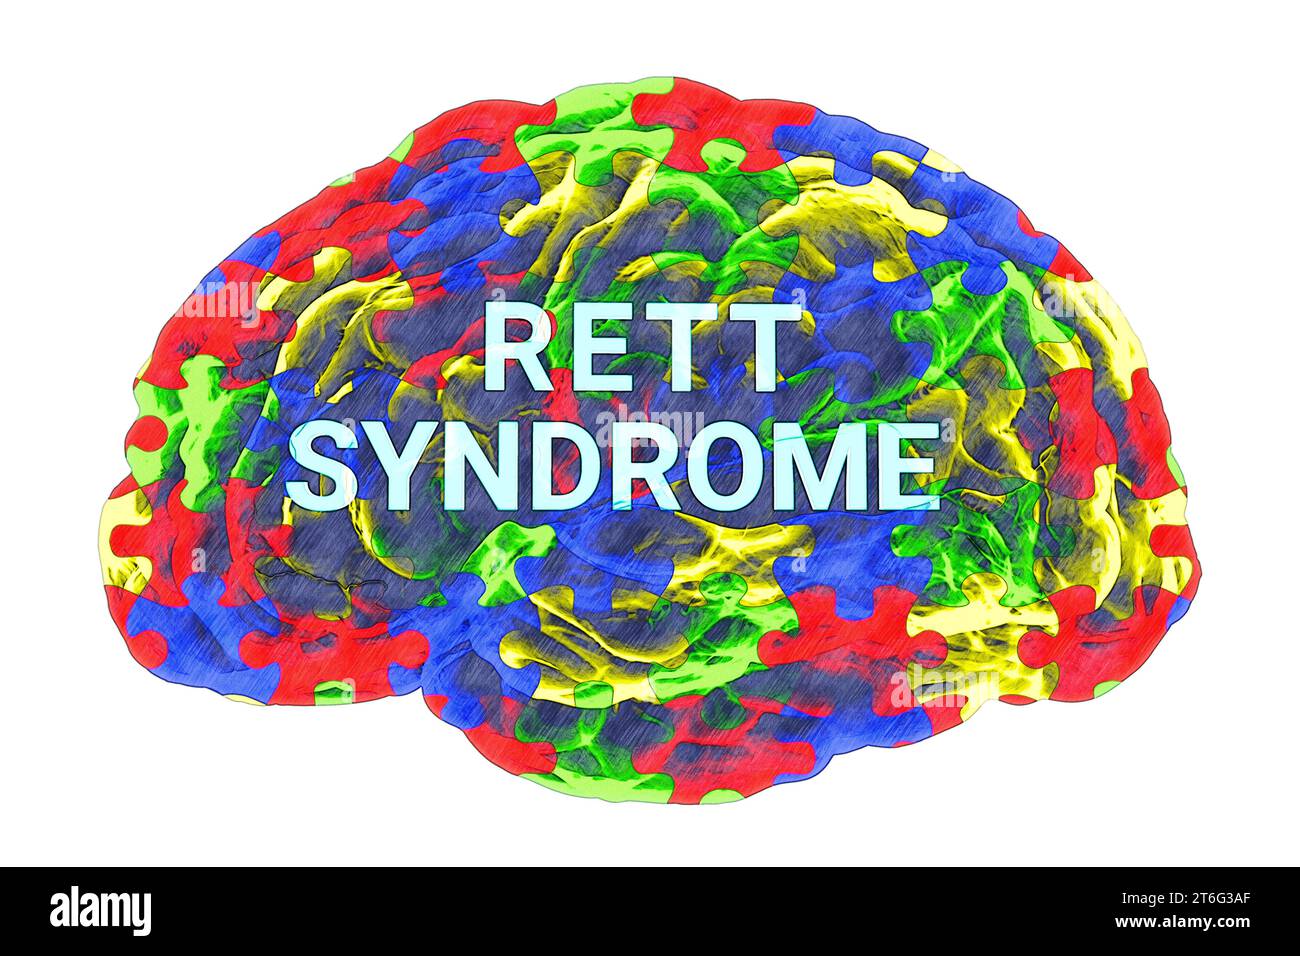 Text Rett Syndrome inside the anatomical model of a human brain, with a colorful puzzle pattern on its surface, highlighting the neurological basis of Stock Photo